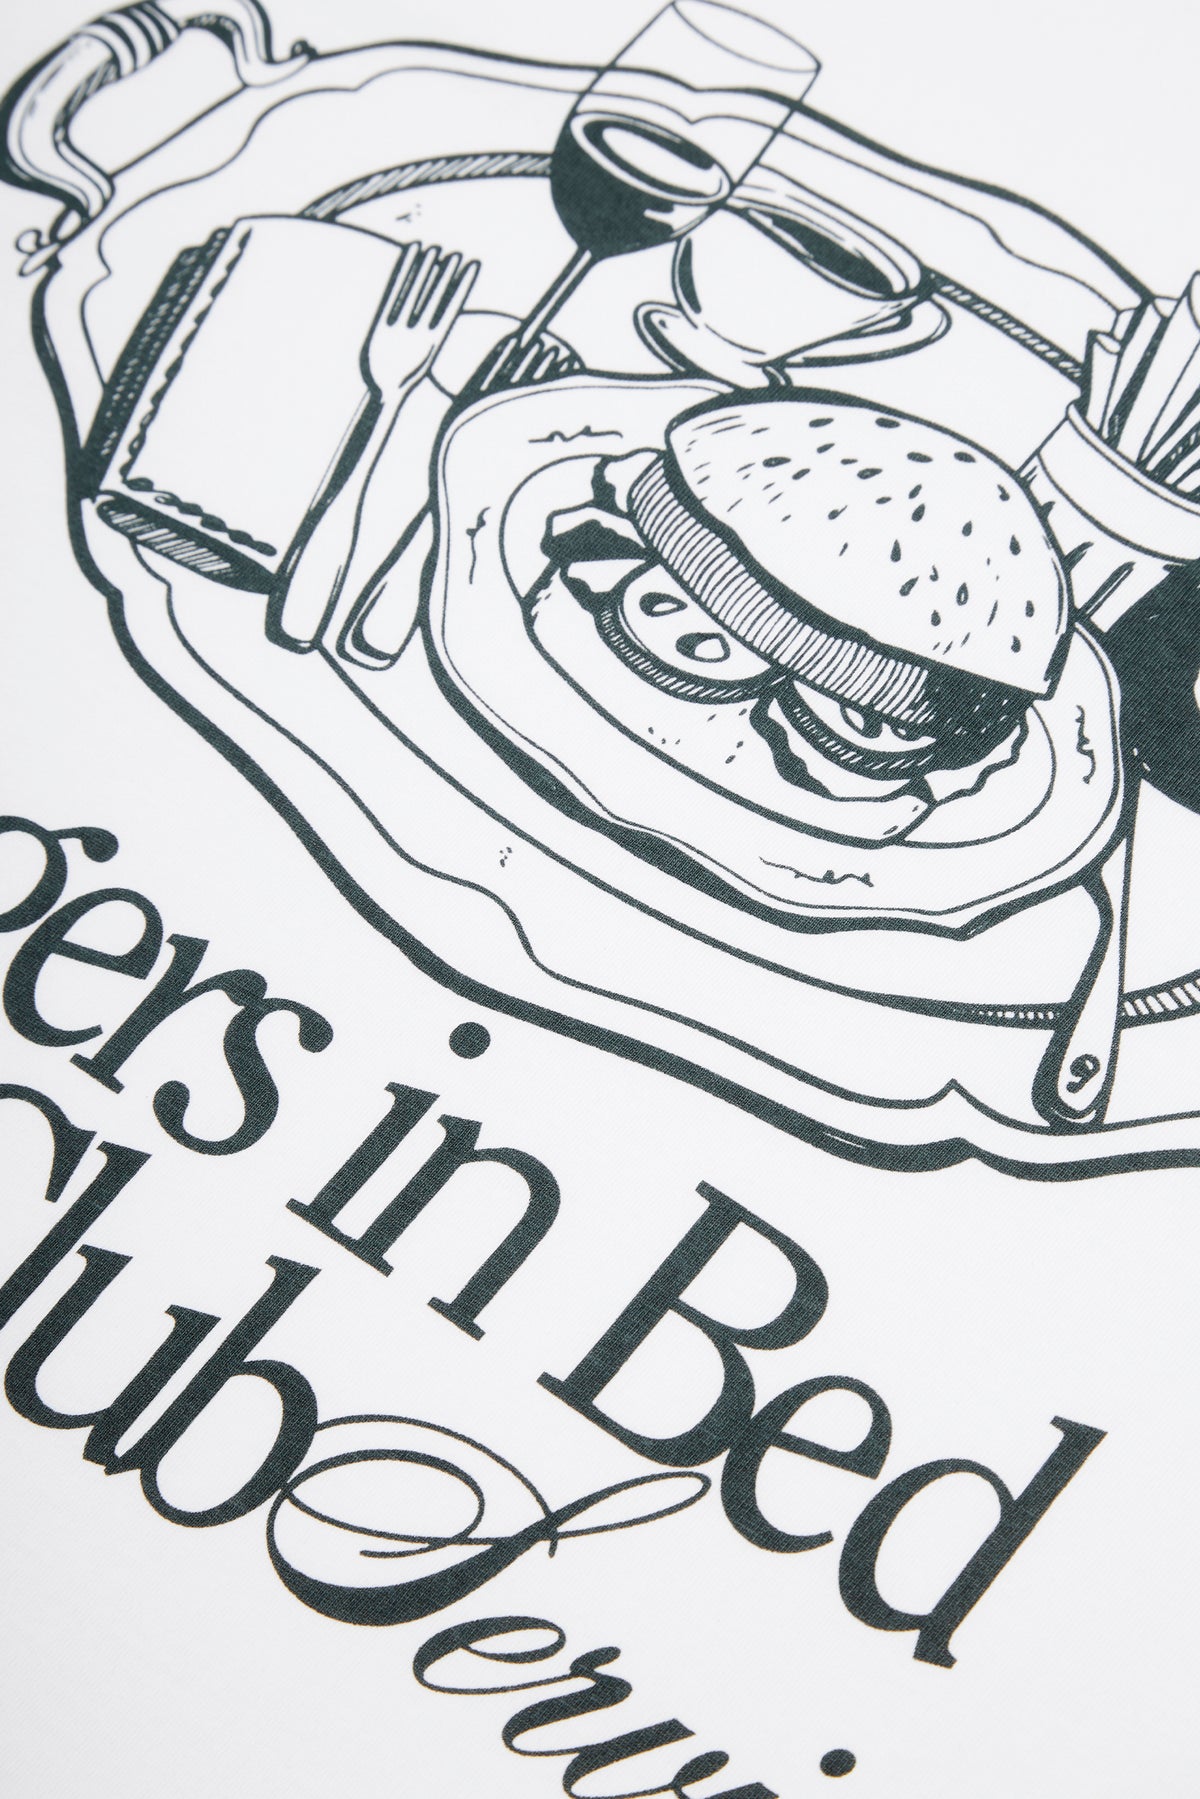 T-SHIRT GRÁFICA "BURGERS IN BED